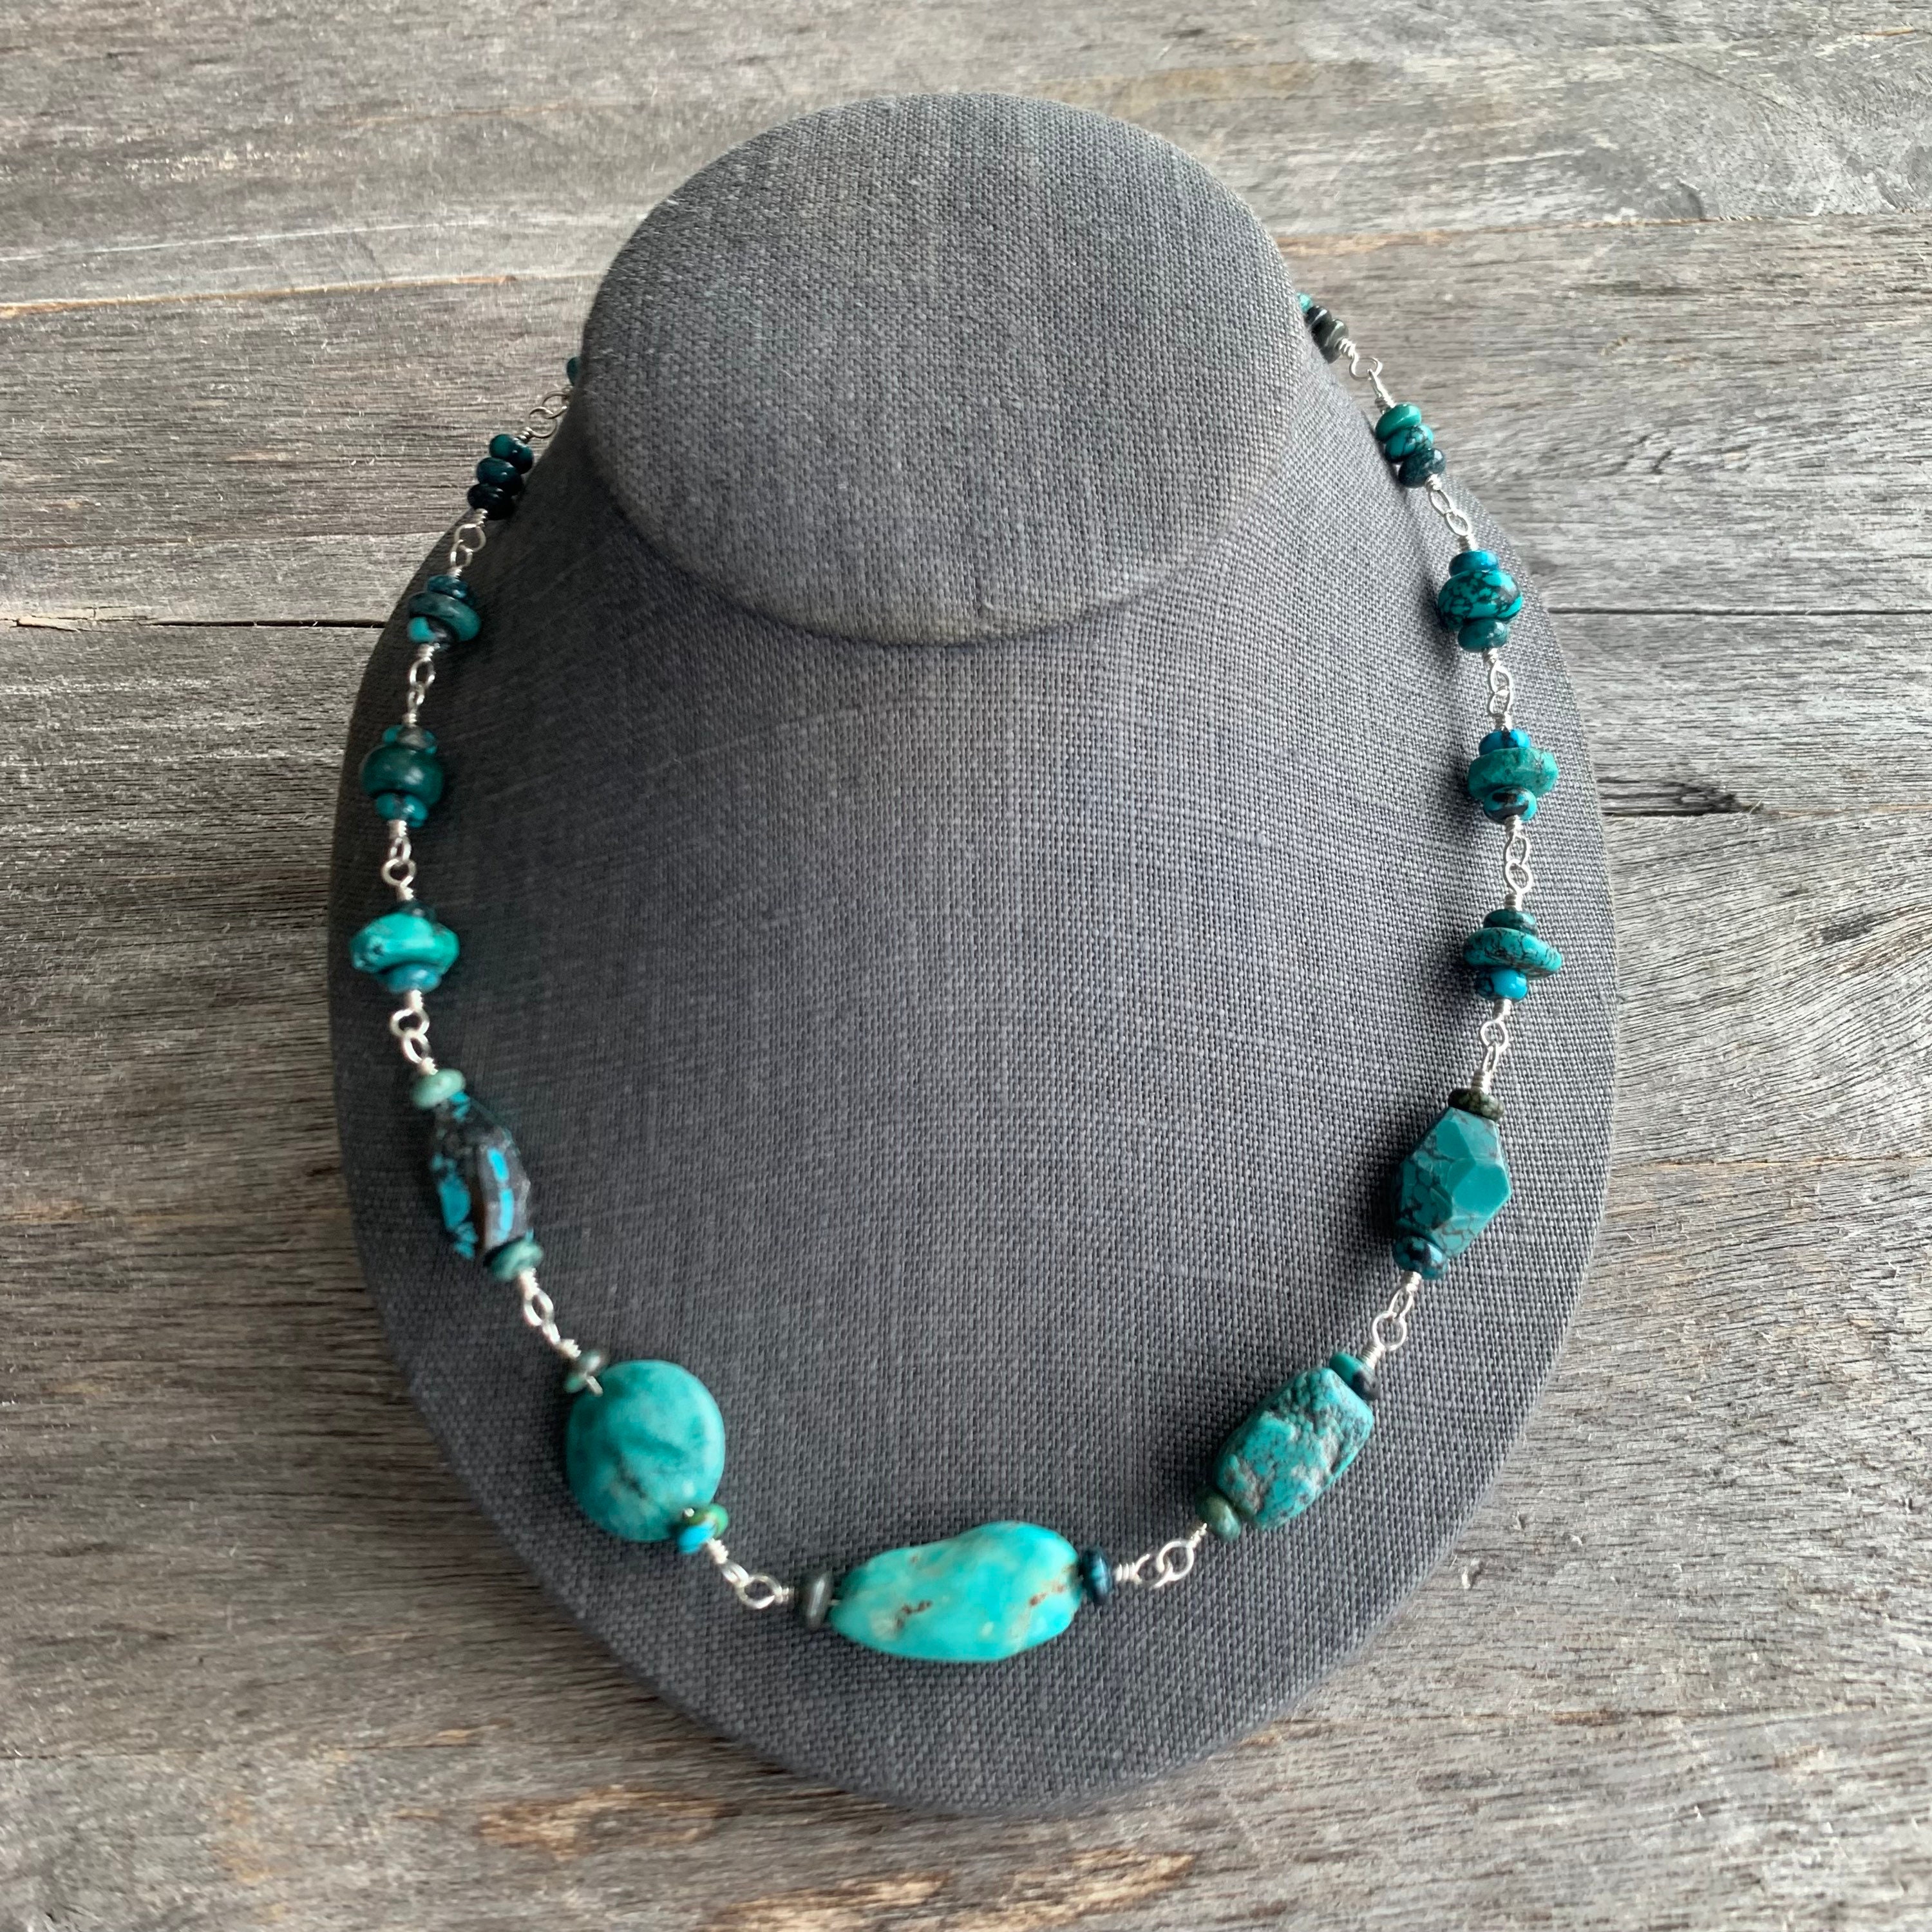 Hubei Turquoise Beaded Necklace 19 inches